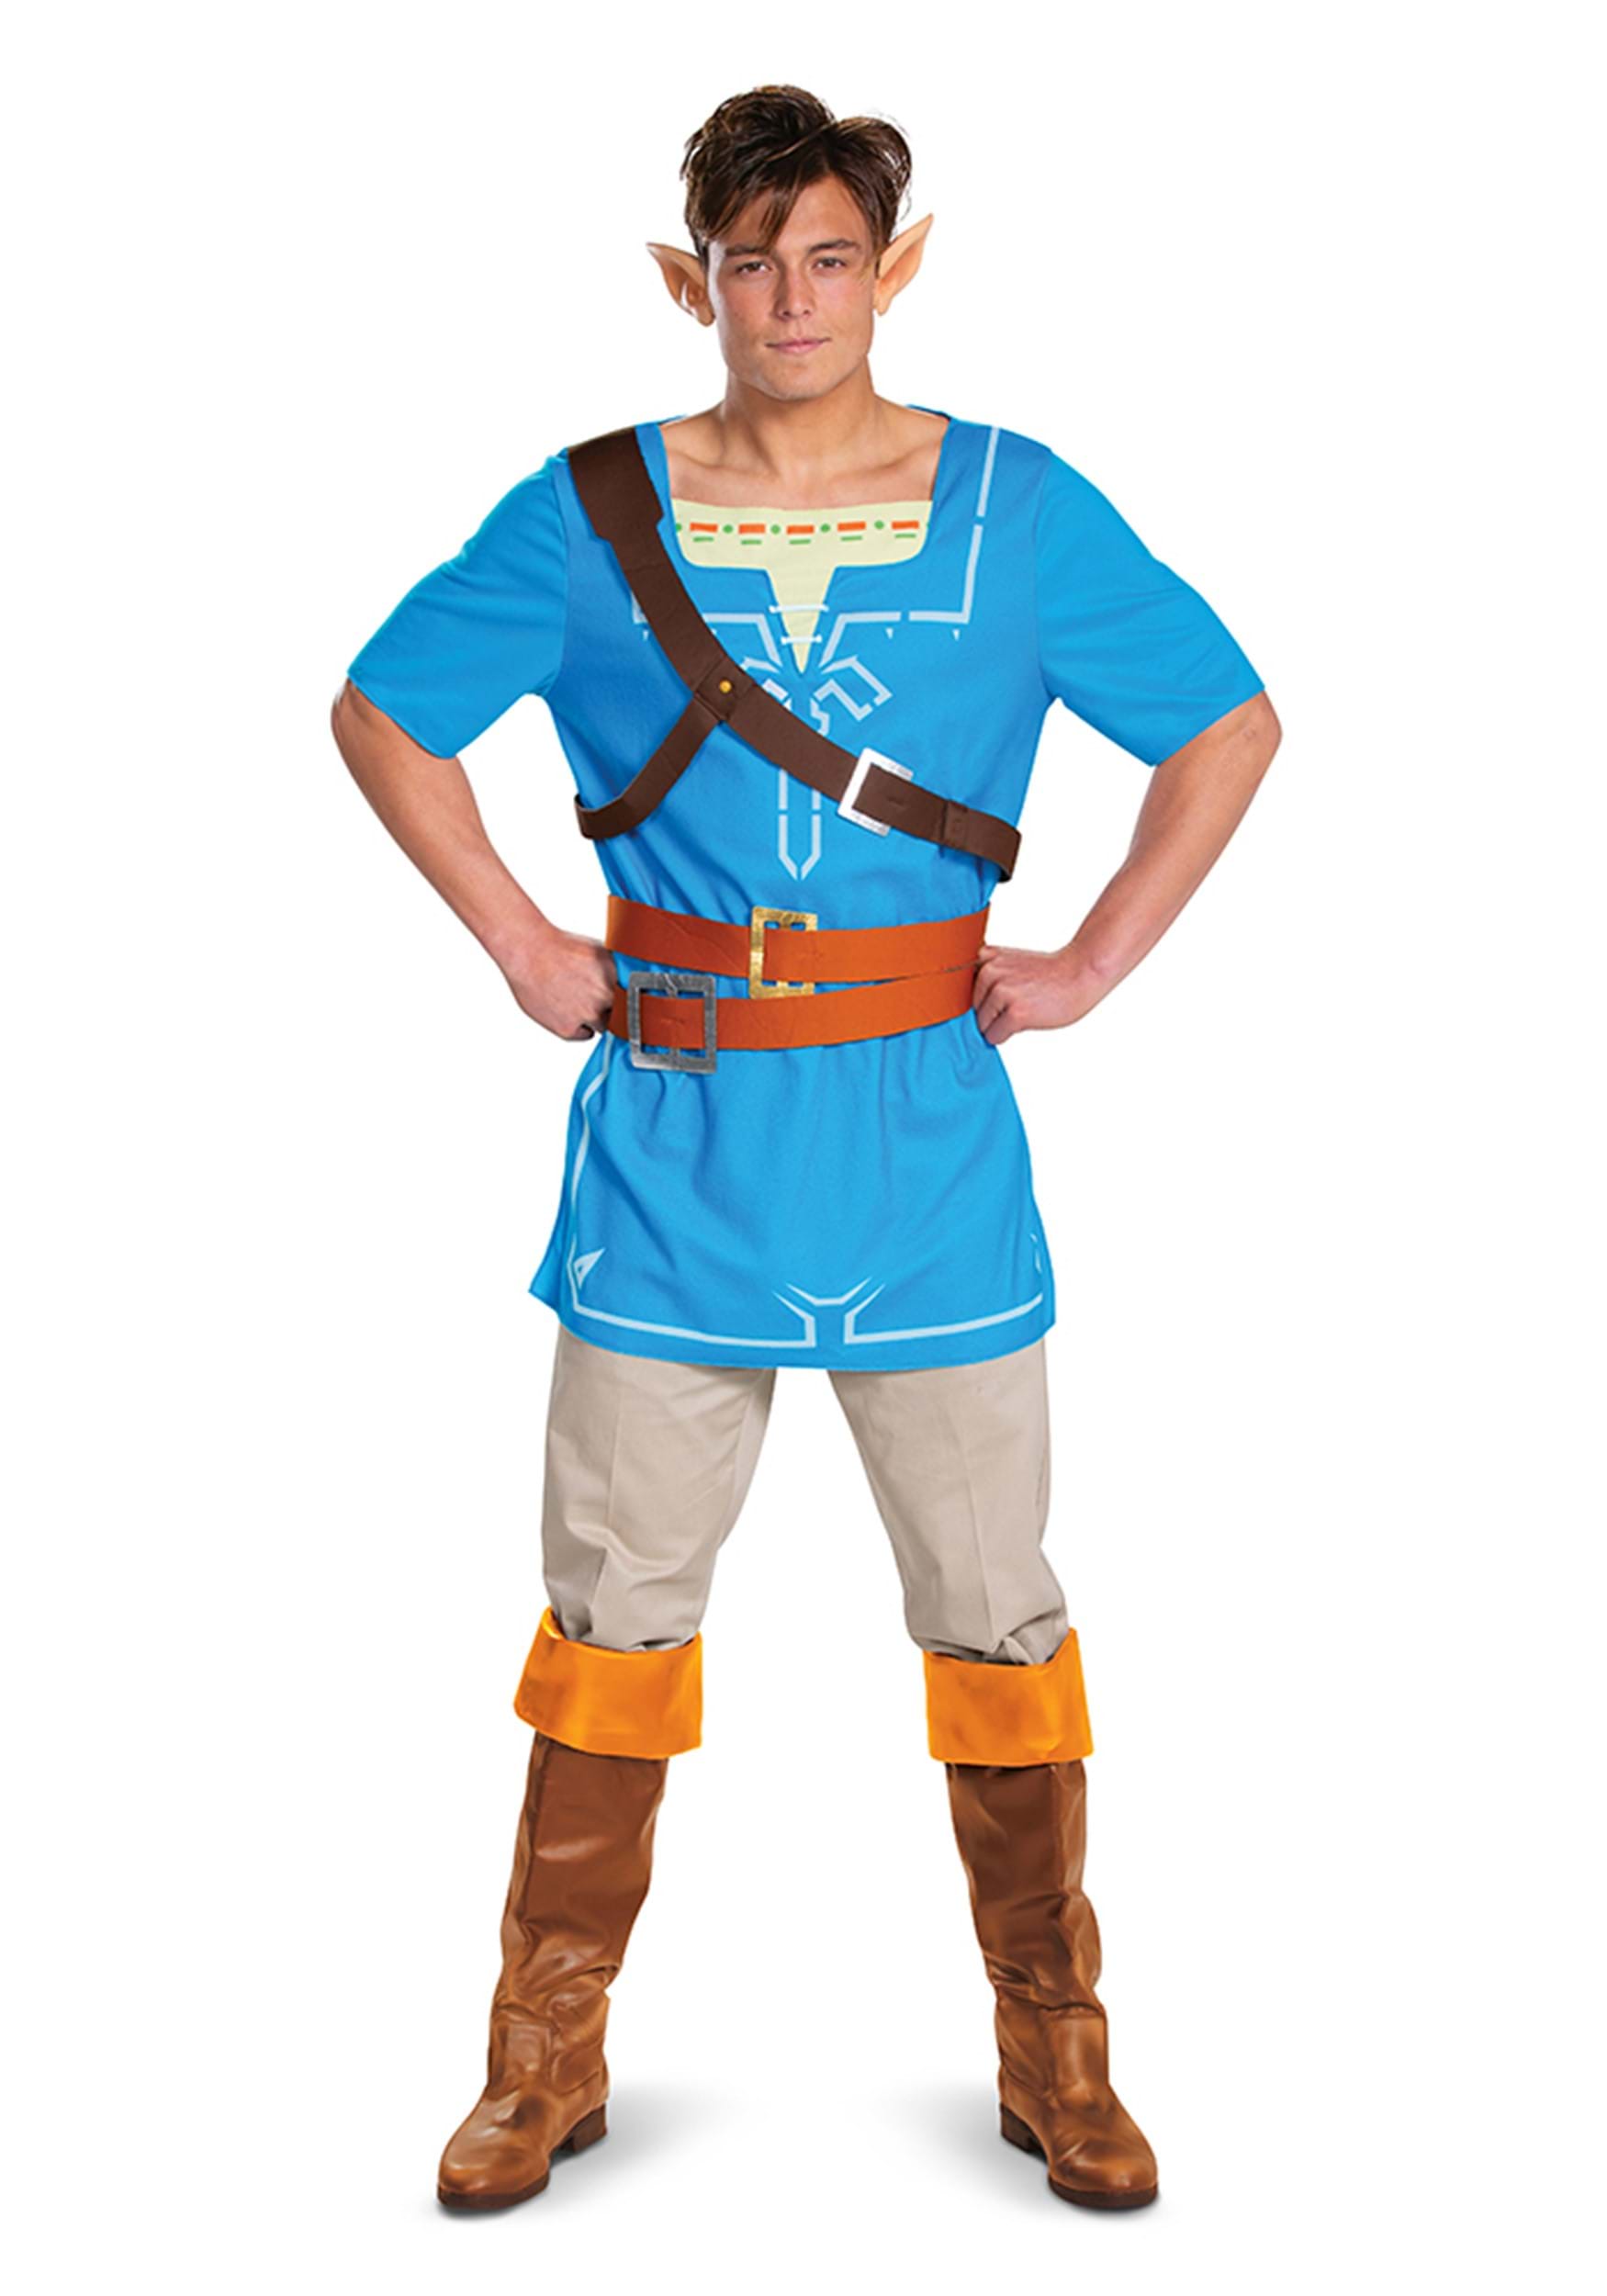 Link Breath Of The Wild Classic Costume For Adults